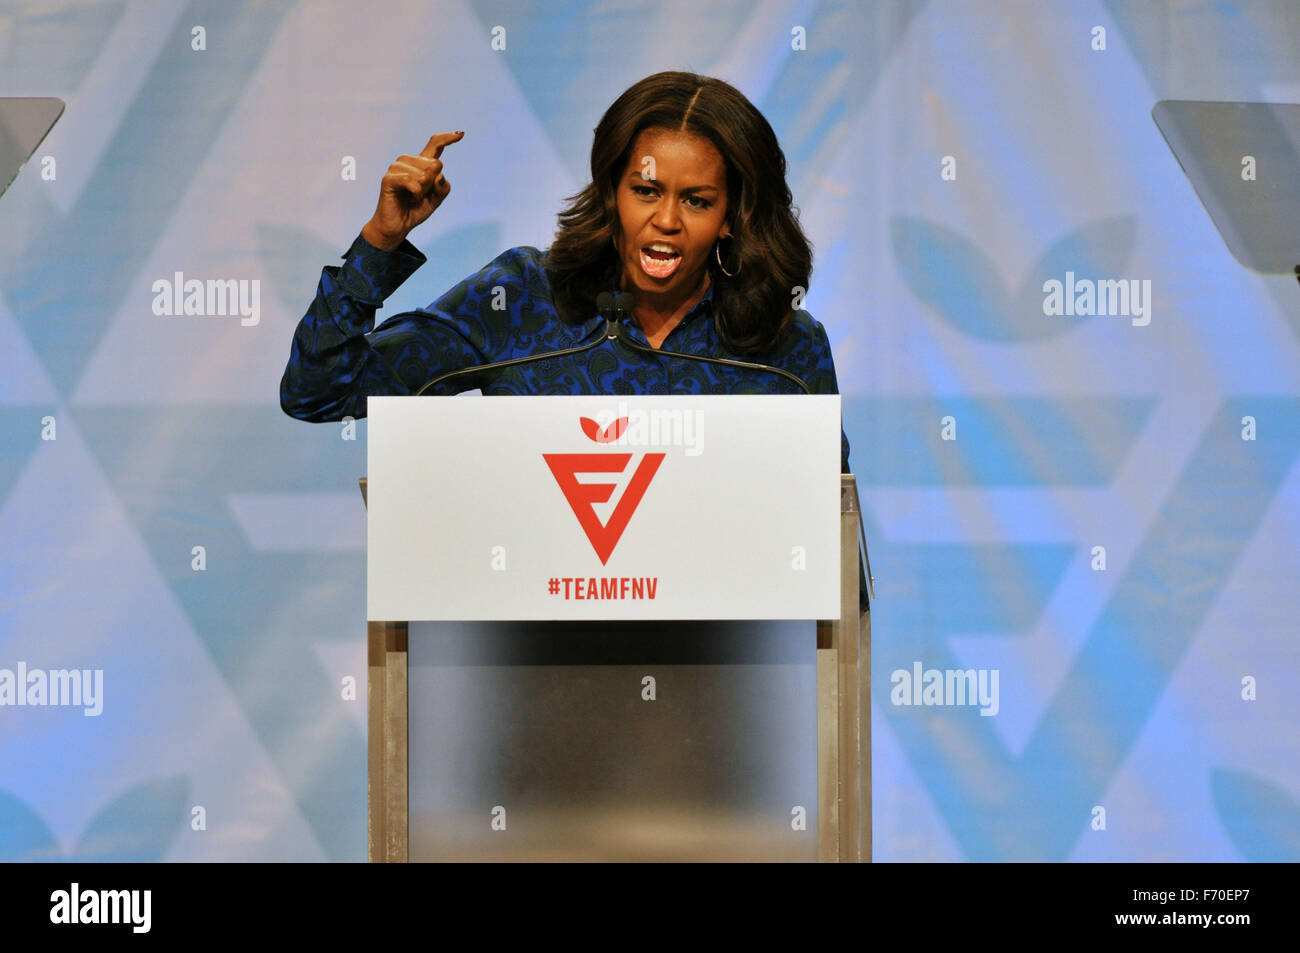 Norfolk, Virginia, USA. 20th Nov, 2015. First Lady MICHELLE OBAMA delivers remarks at FNV Live! highlighting efforts toward marketing healthier options as part of her Let's Move! initiative. She joins the Partnership for a Healthier America, a national brand focused on increasing fruit and vegetable consumption and sales. © Tina Fultz/ZUMA Wire/Alamy Live News Stock Photo